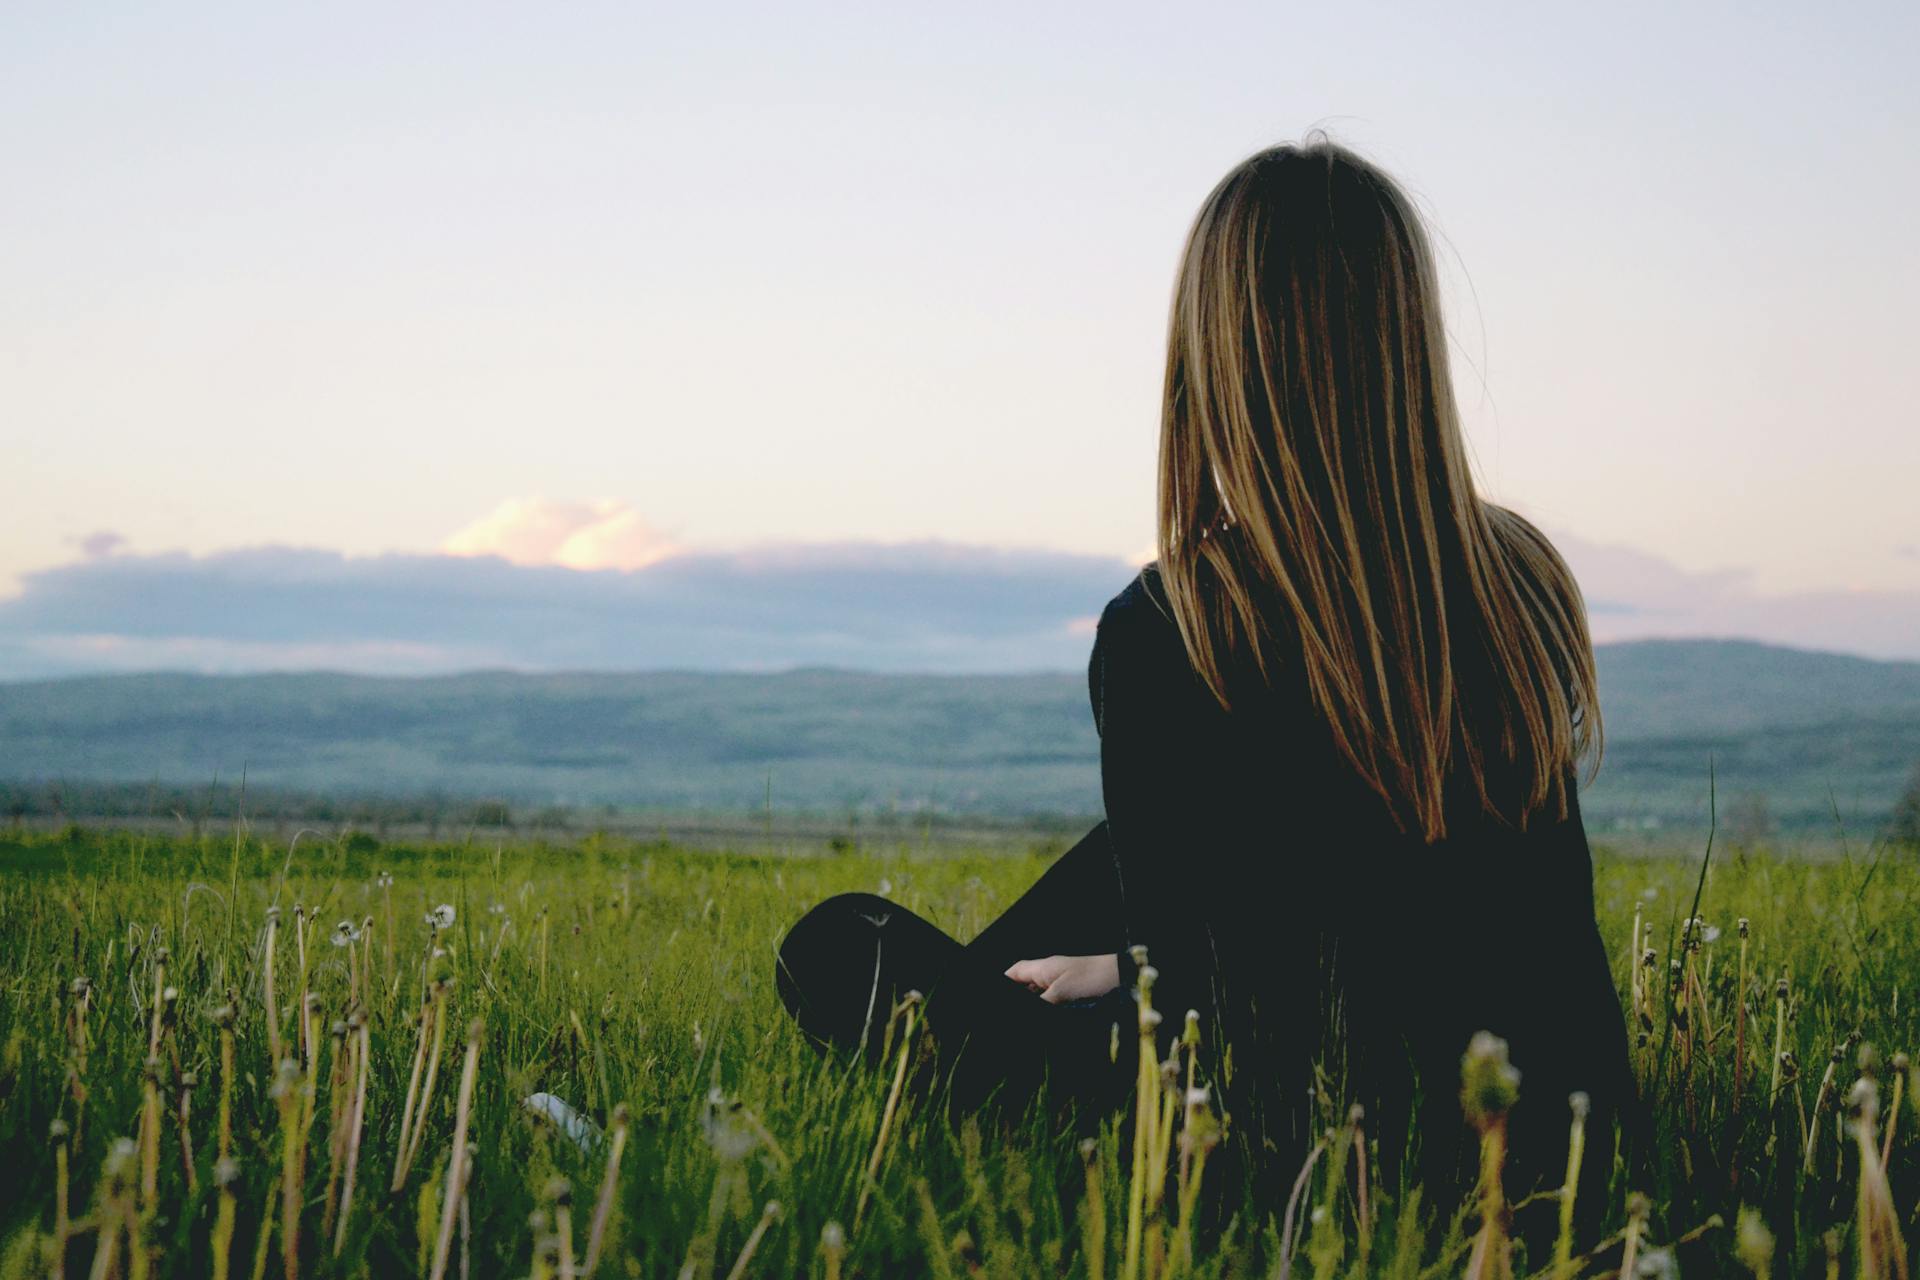 A back view of a woman sitting in a green field | Source: Pexels